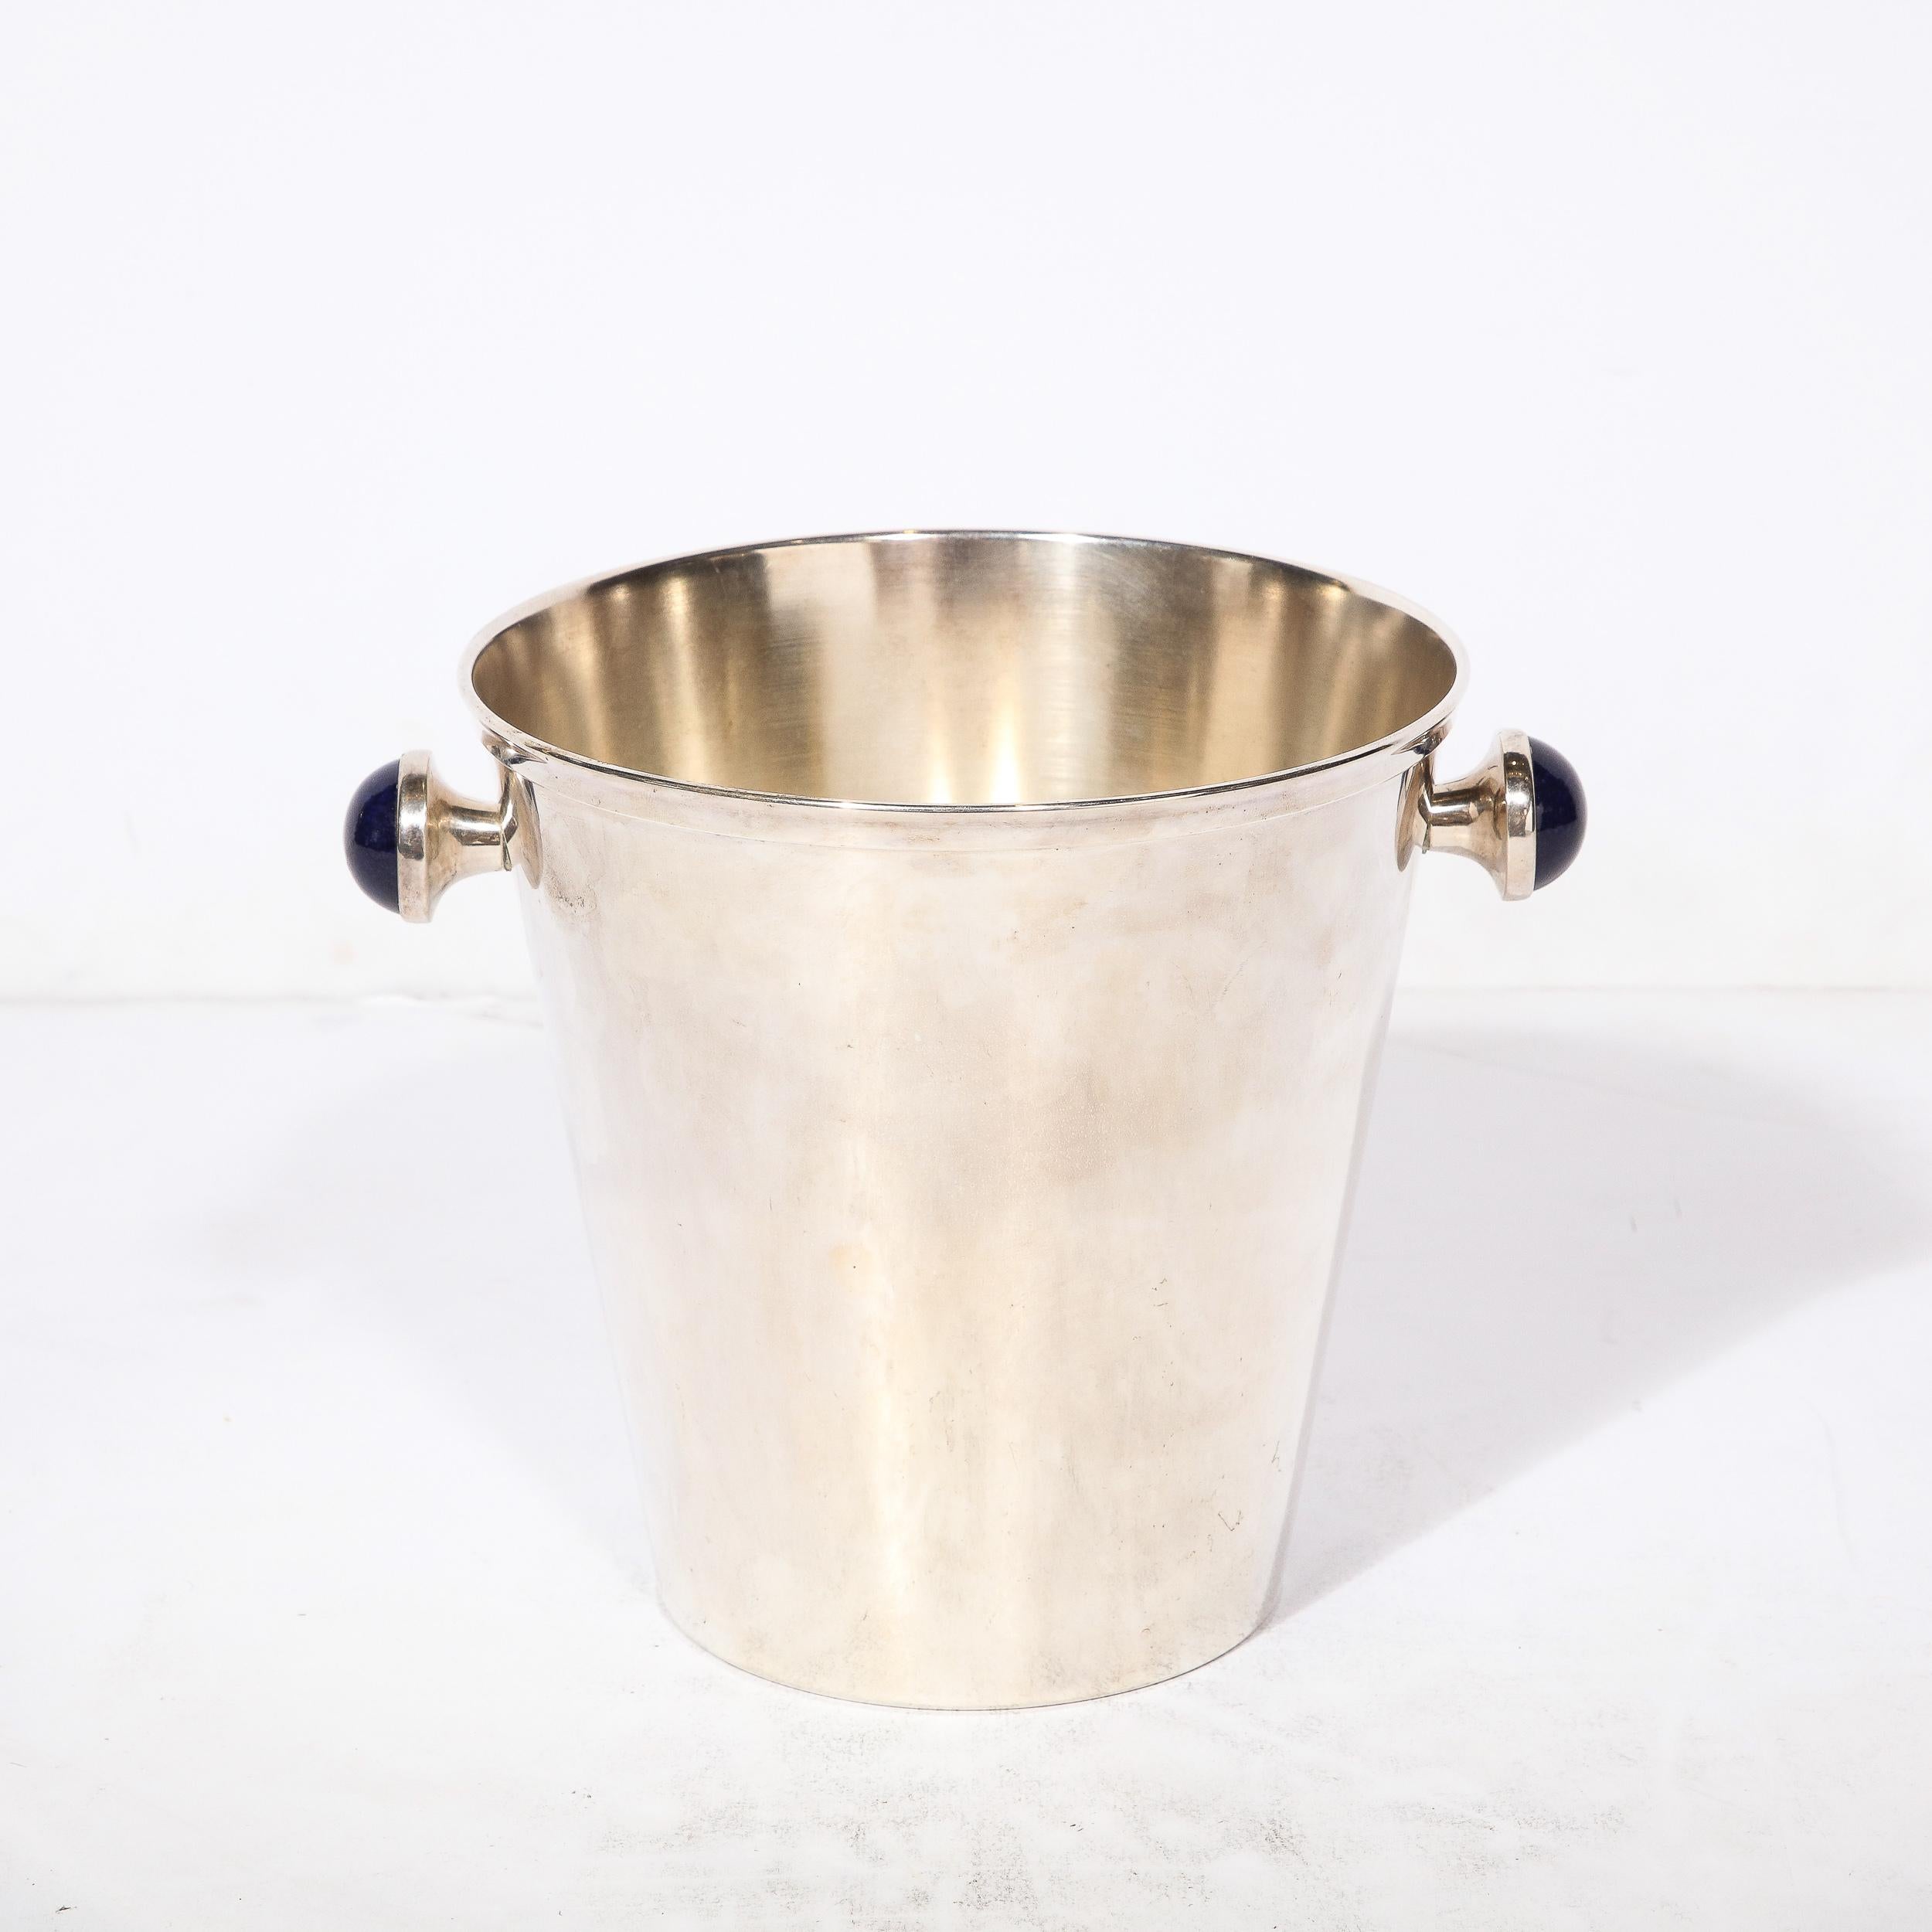 This stunning and rare Mid-Century Modernist  Silver Plate Ice Bucket originates from France, Circa 1950. A true gem brimming with elegance, the rounded handles are inlaid with genuine Lapiz Laulie, a highly rare and sought after mineral originating